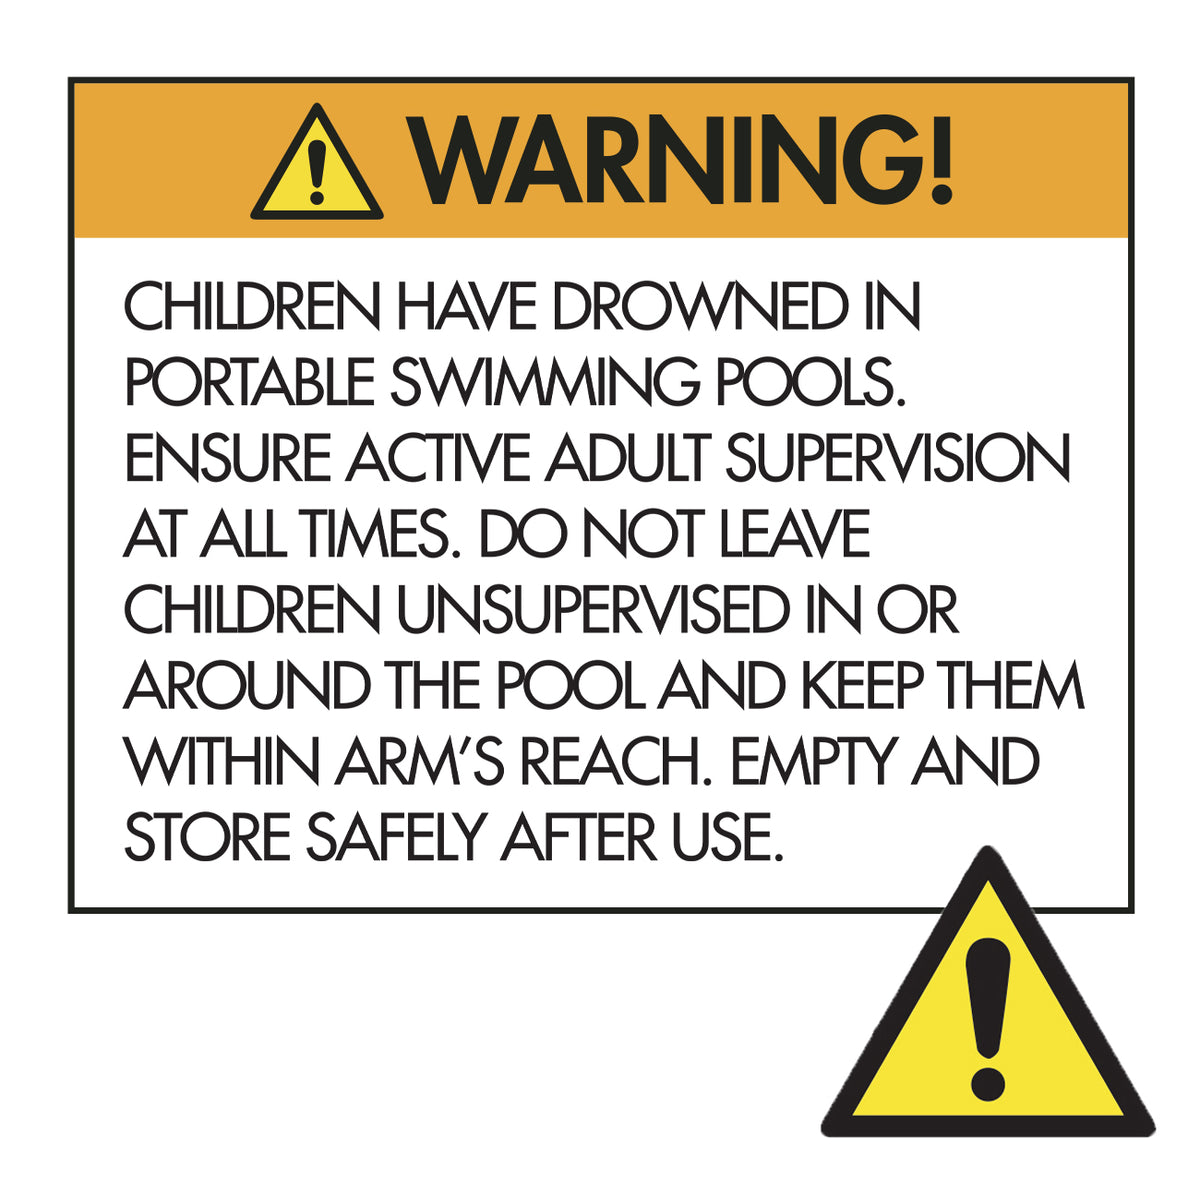 Warning label of the Children's Tug Boat Play Pool.